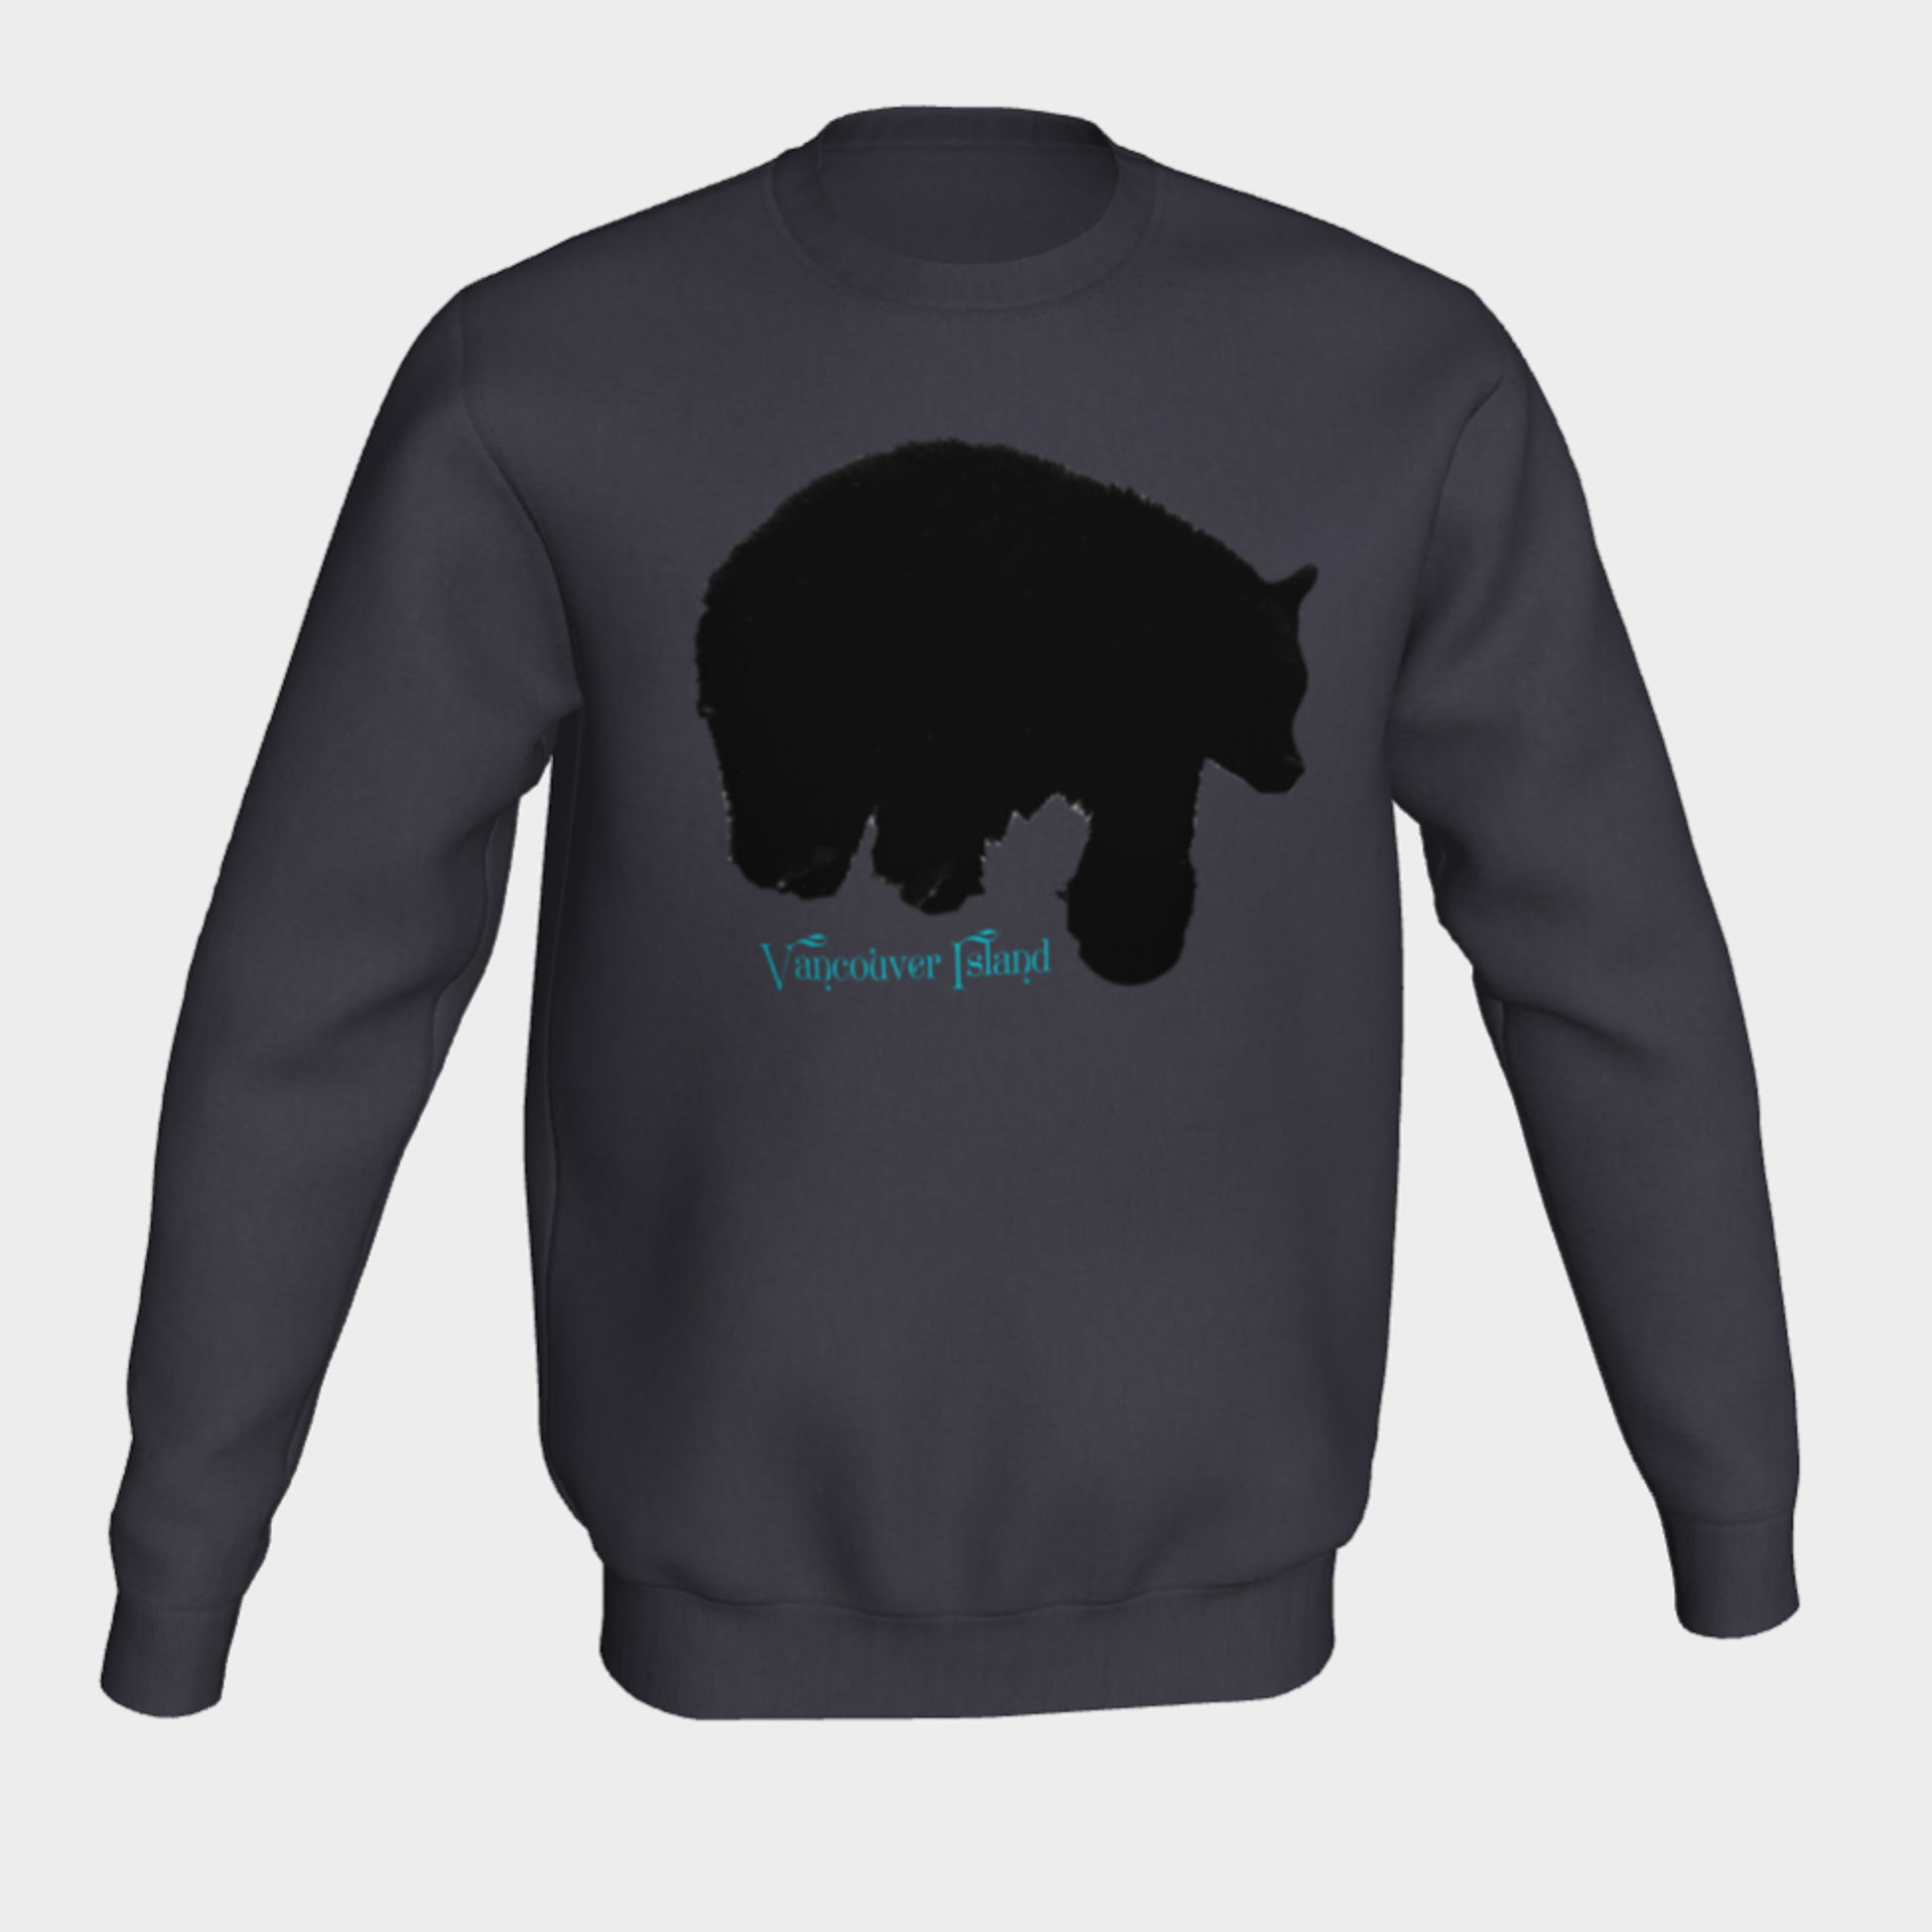 Bear Vancouver Island (Turquoise Print) Unisex Crewneck Sweatshirt What’s better than a super cozy sweatshirt? A super cozy sweatshirt from Van Isle Goddess!  Super cozy unisex sweatshirt for those chilly days.  Excellent for men or women.   Fit is roomy and comfortable. 